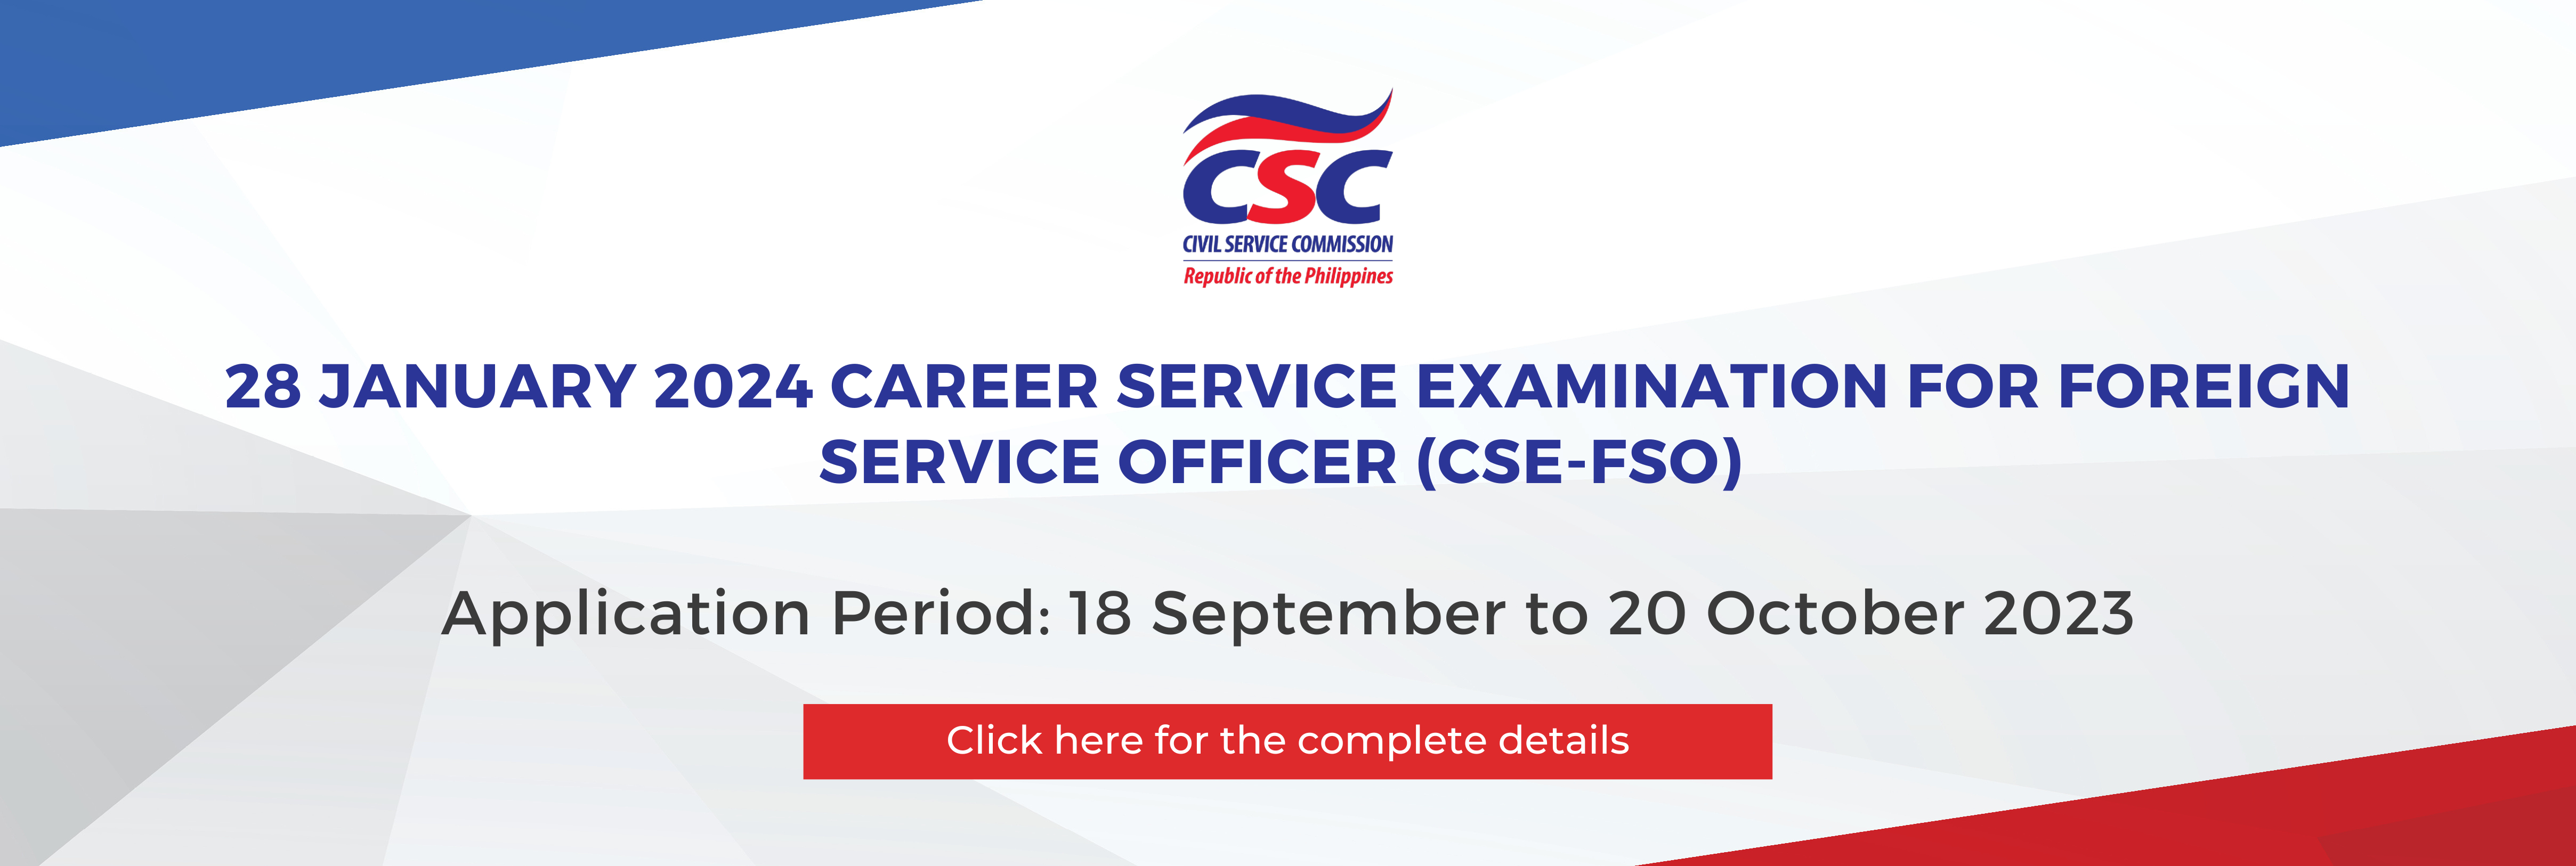 2024 Career Service Examination for Foreign Service Officer (CSE-FSO) 